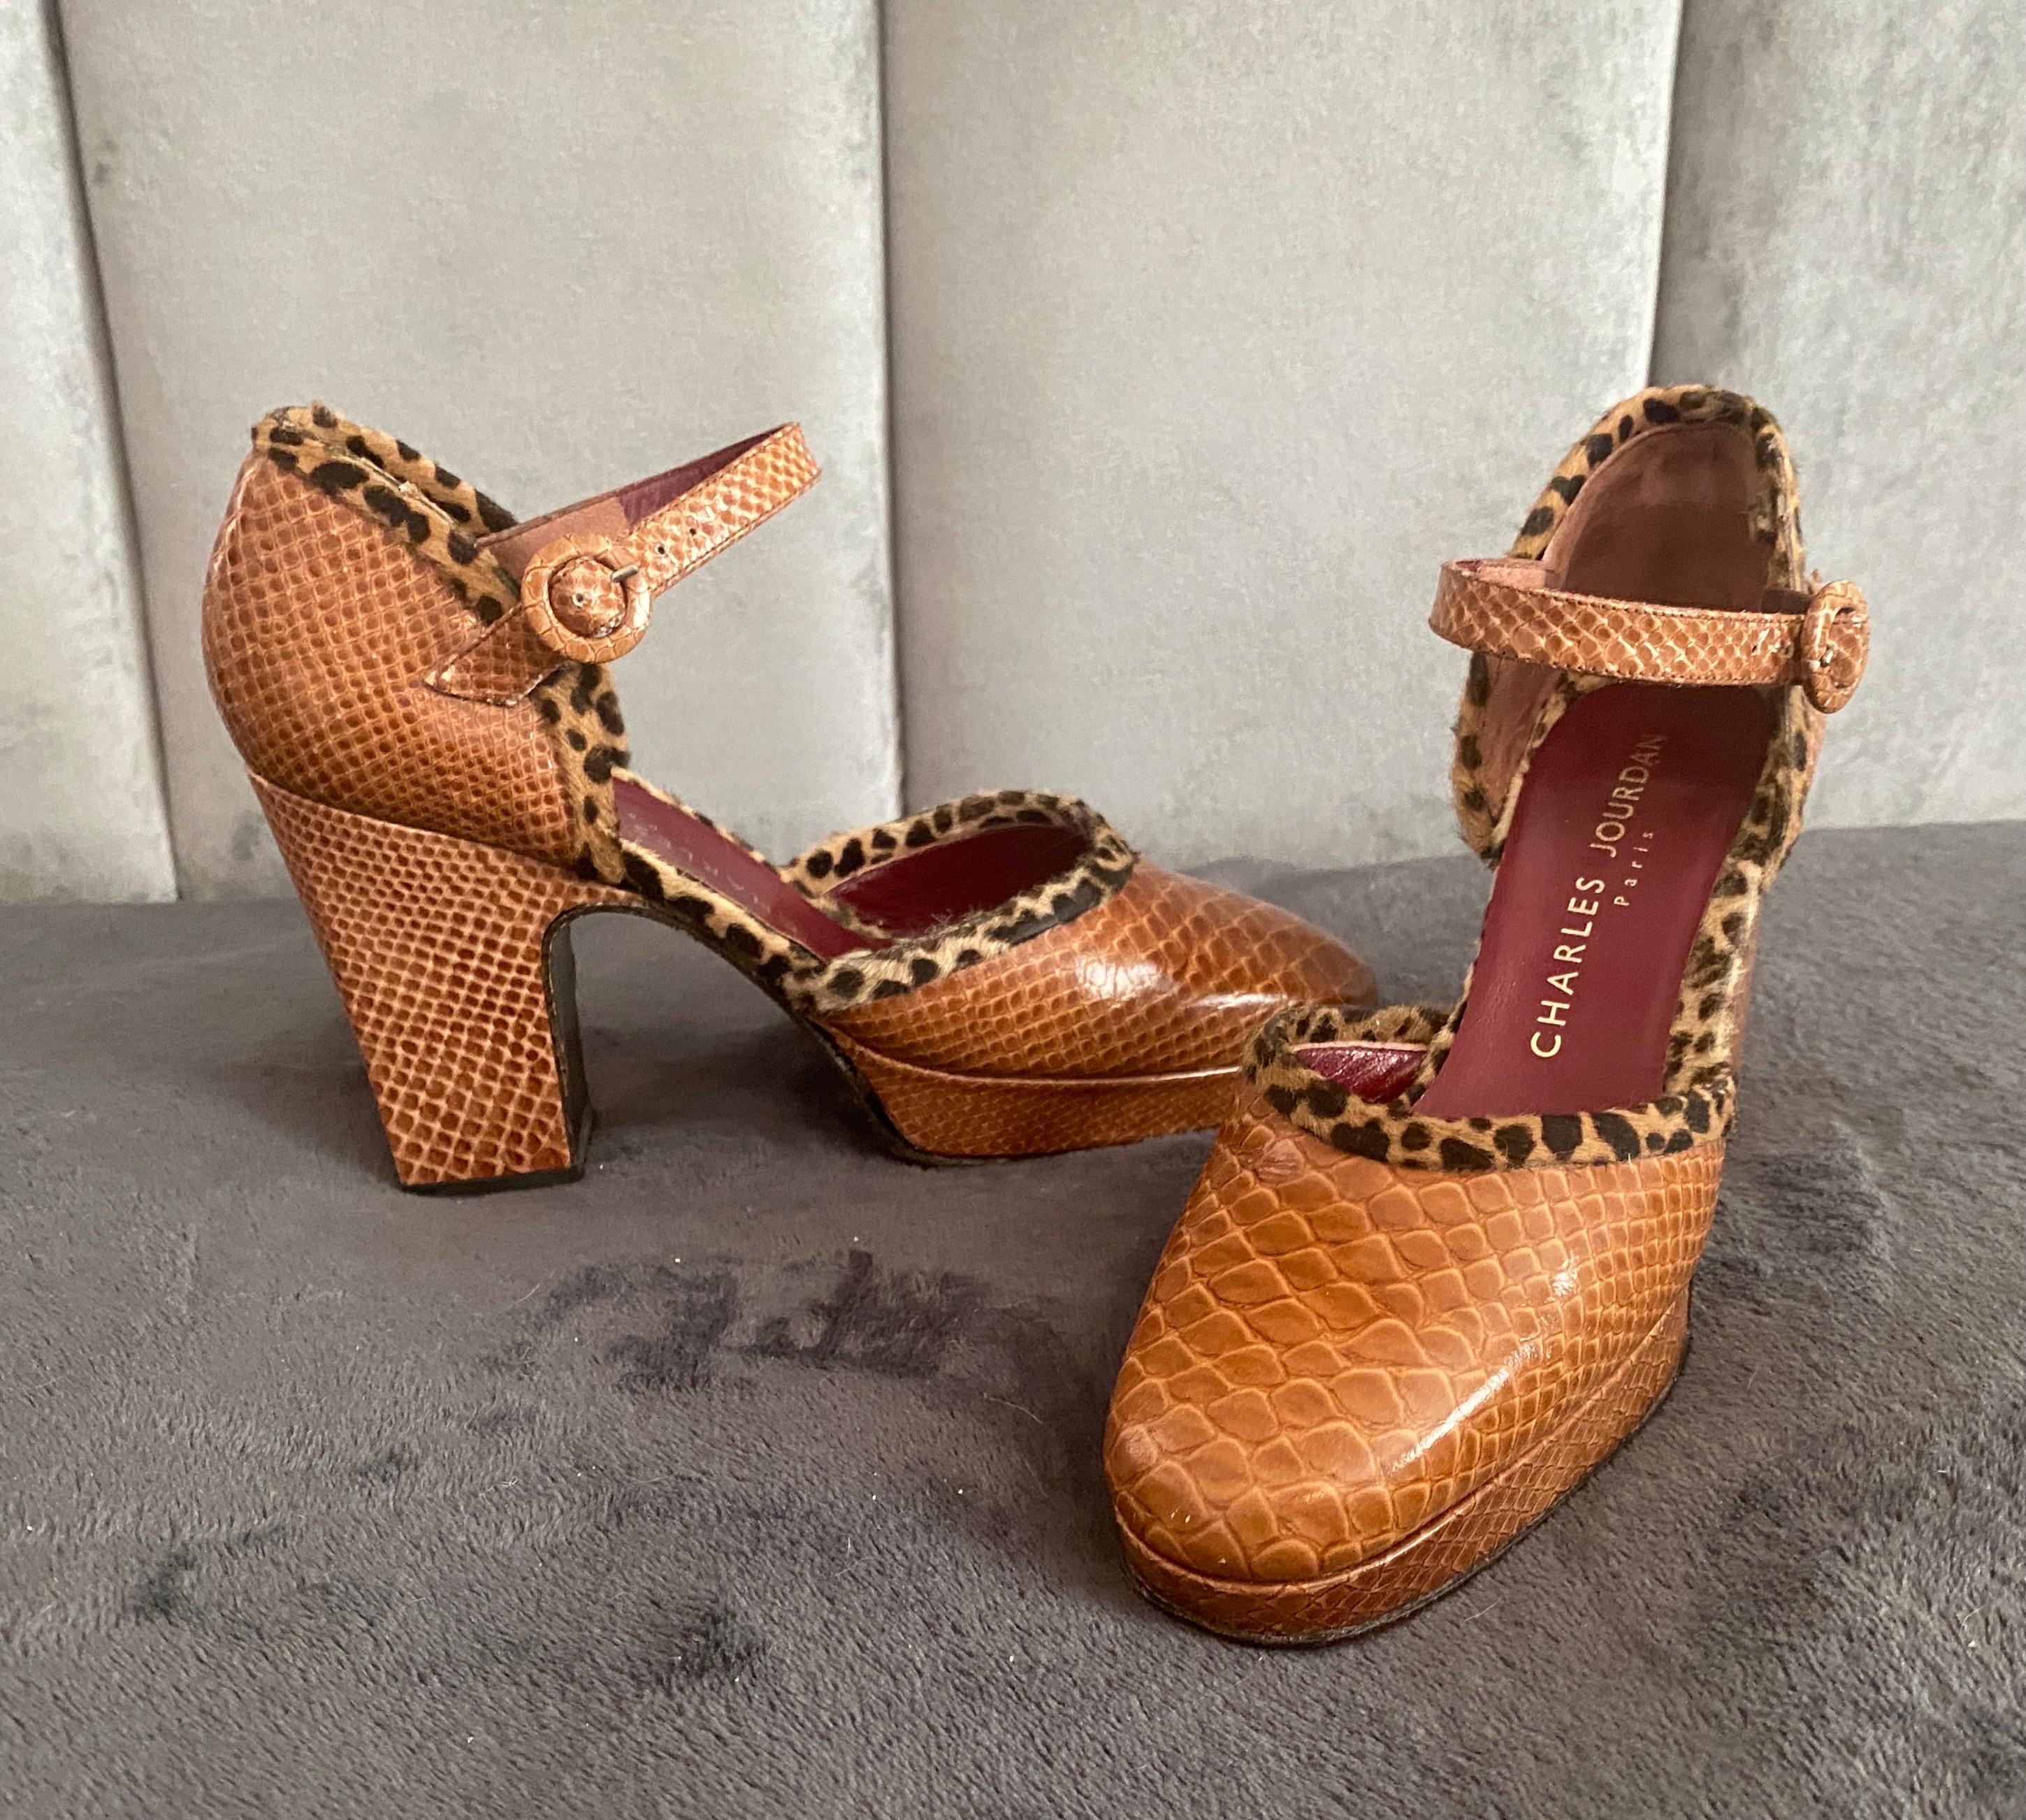 Such an amazing pair of vintage Charles Jourdan, Paris shoes. The body of the shoe is an embossed snake print leather. The trim is I believe cowhide printed to look like leopard. These shoes are sexy.! The condition of these vintage shoes is